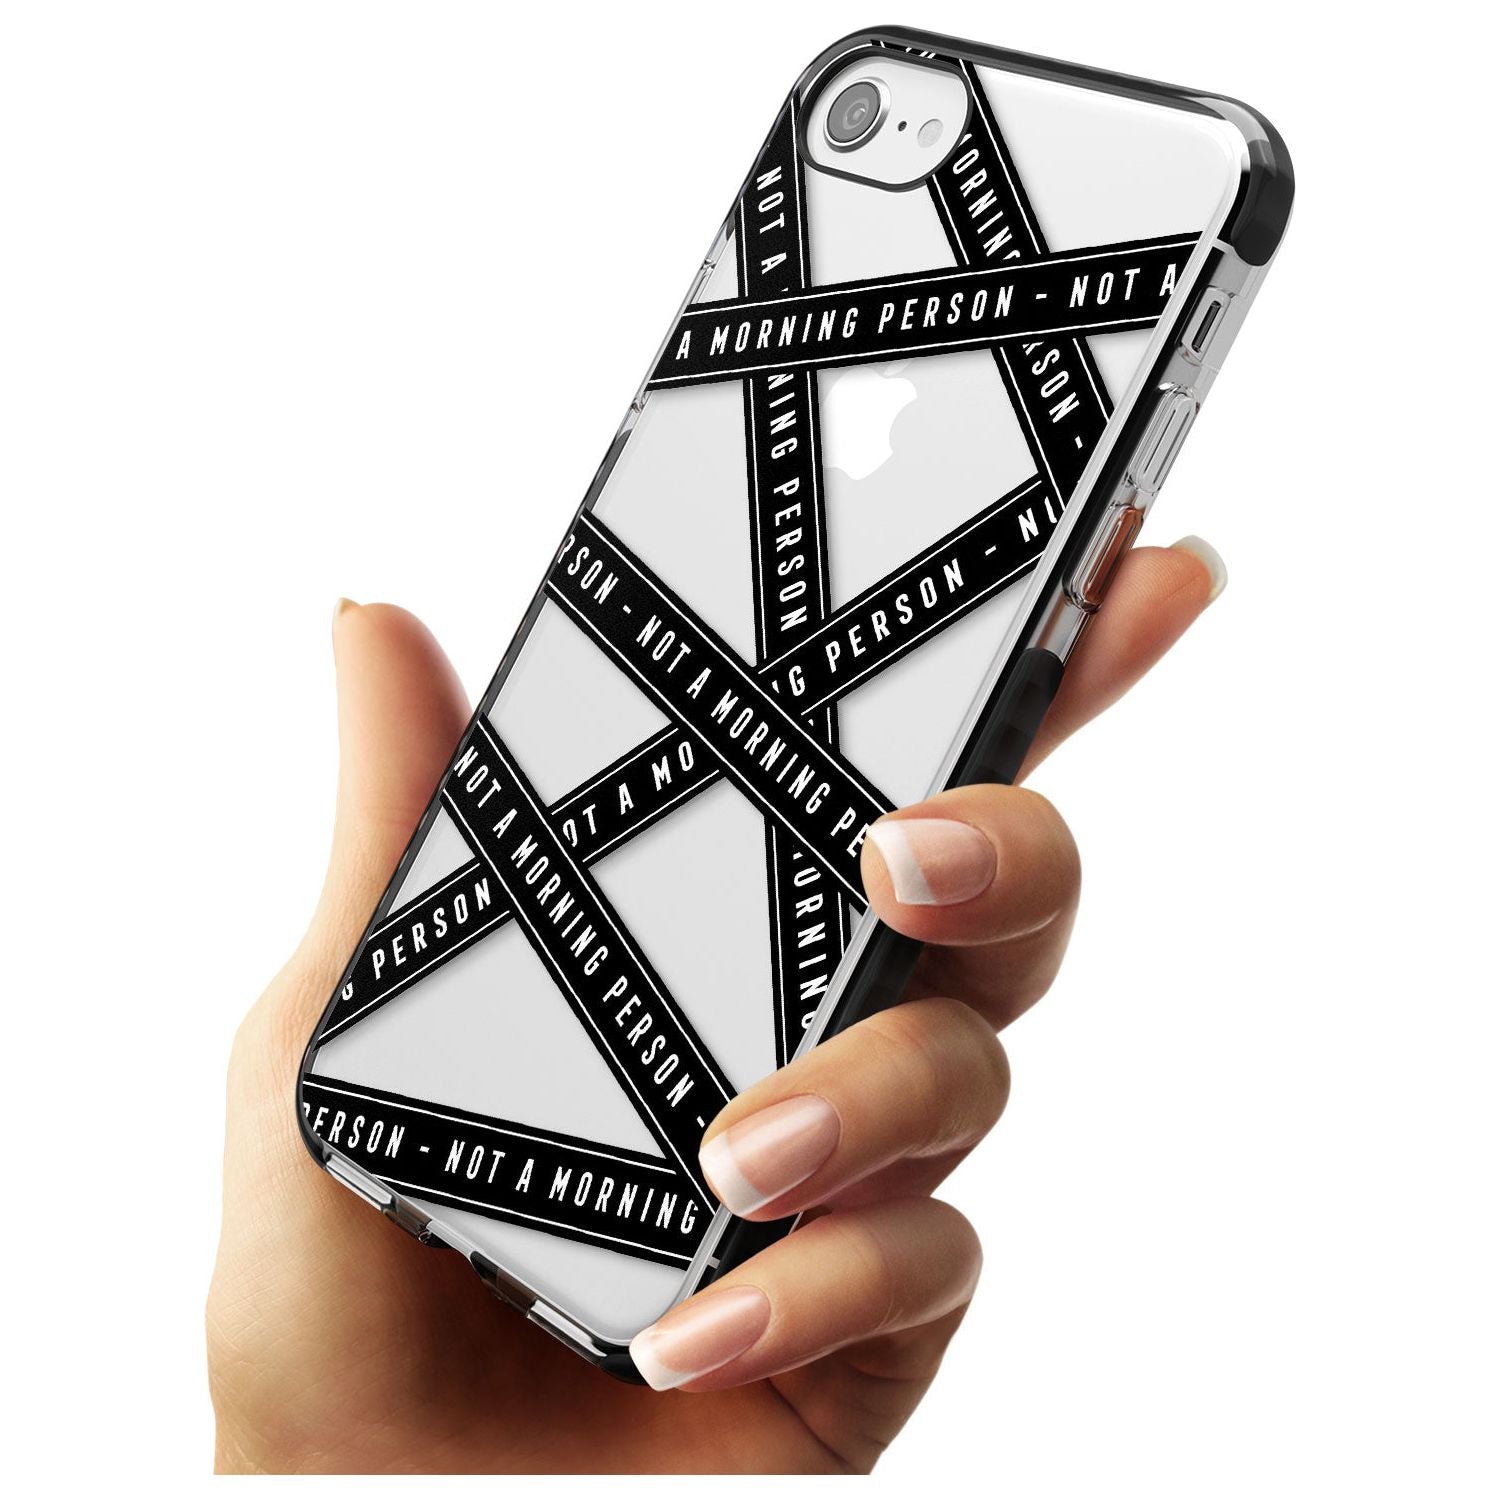 Caution Tape (Clear) Not a Morning Person Black Impact Phone Case for iPhone SE 8 7 Plus